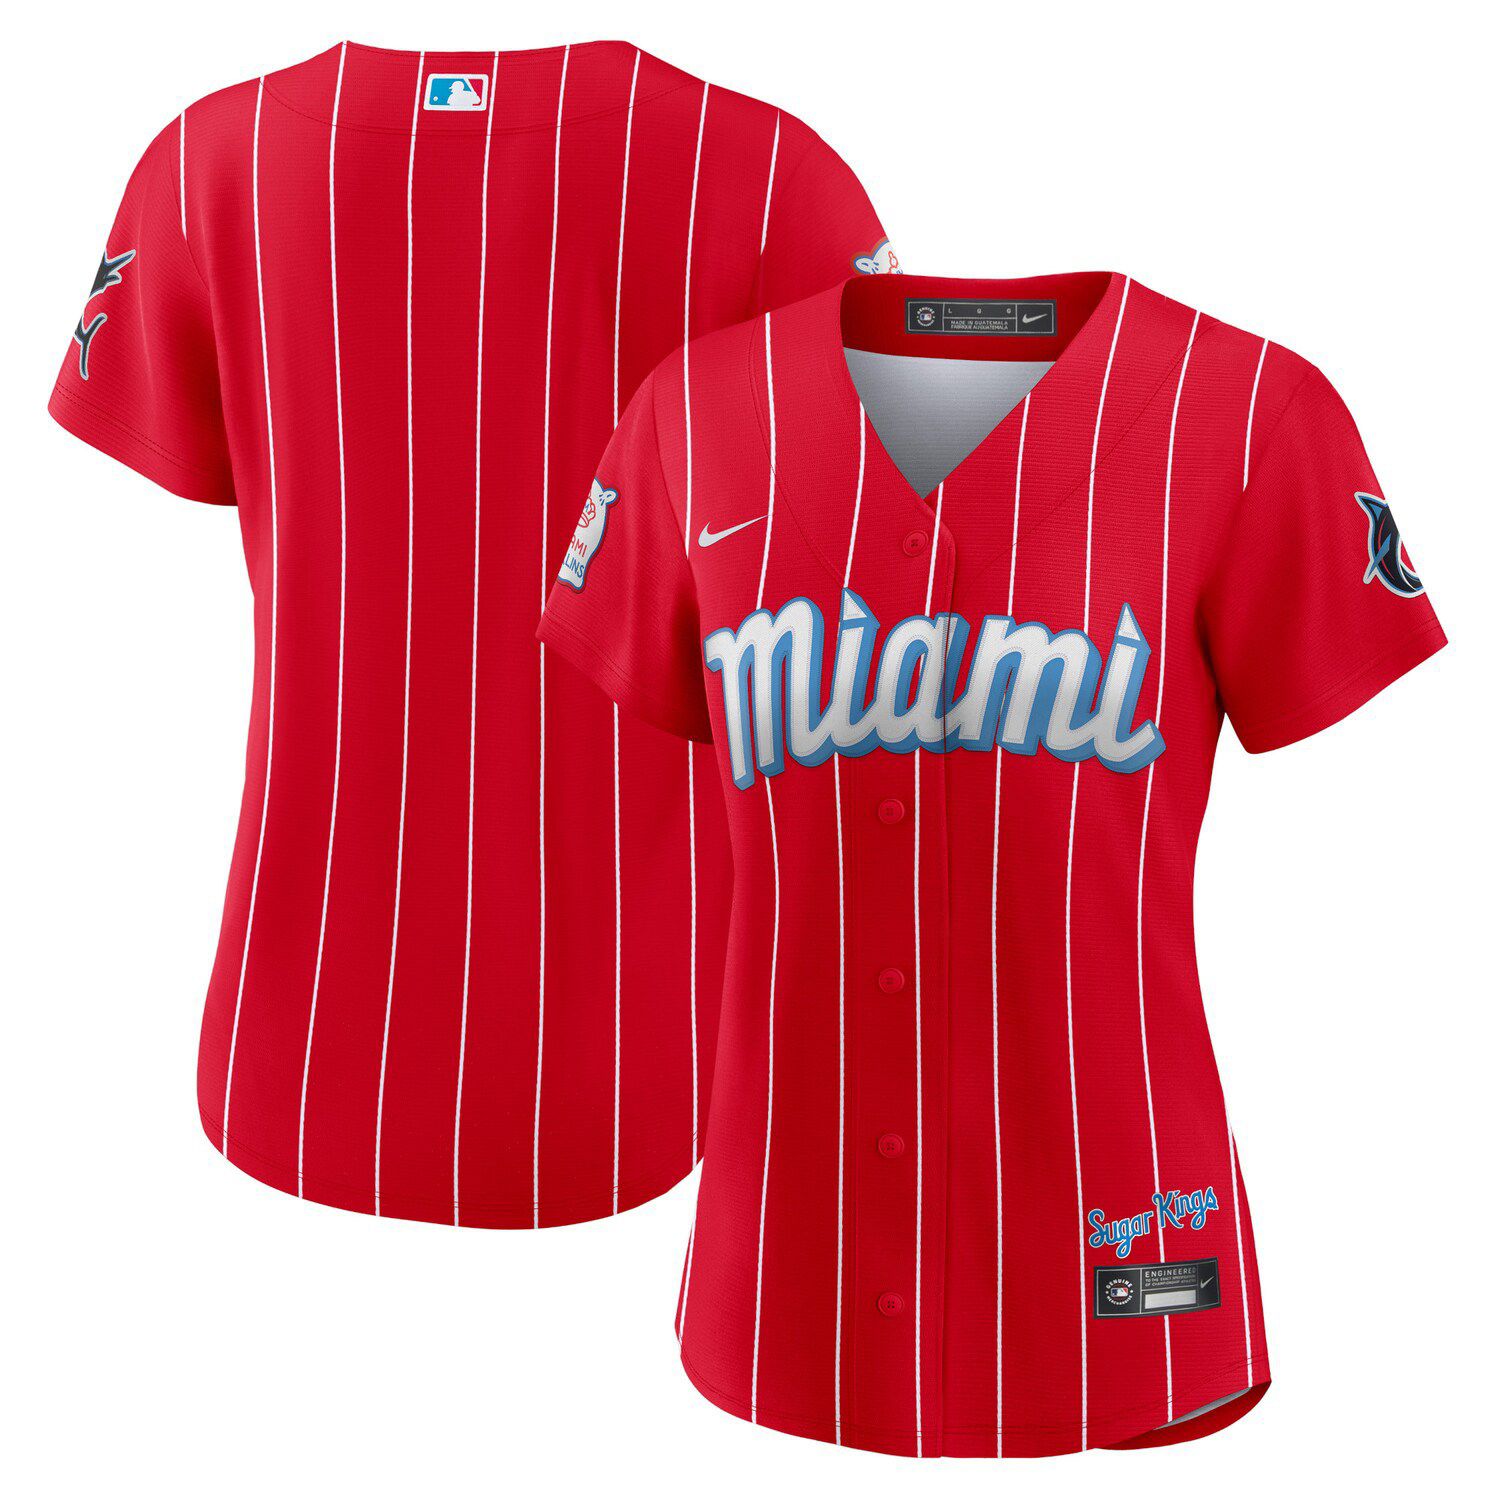 Men's Nike Jazz Chisholm Jr. Red Miami Marlins City Connect Replica Player Jersey, XL